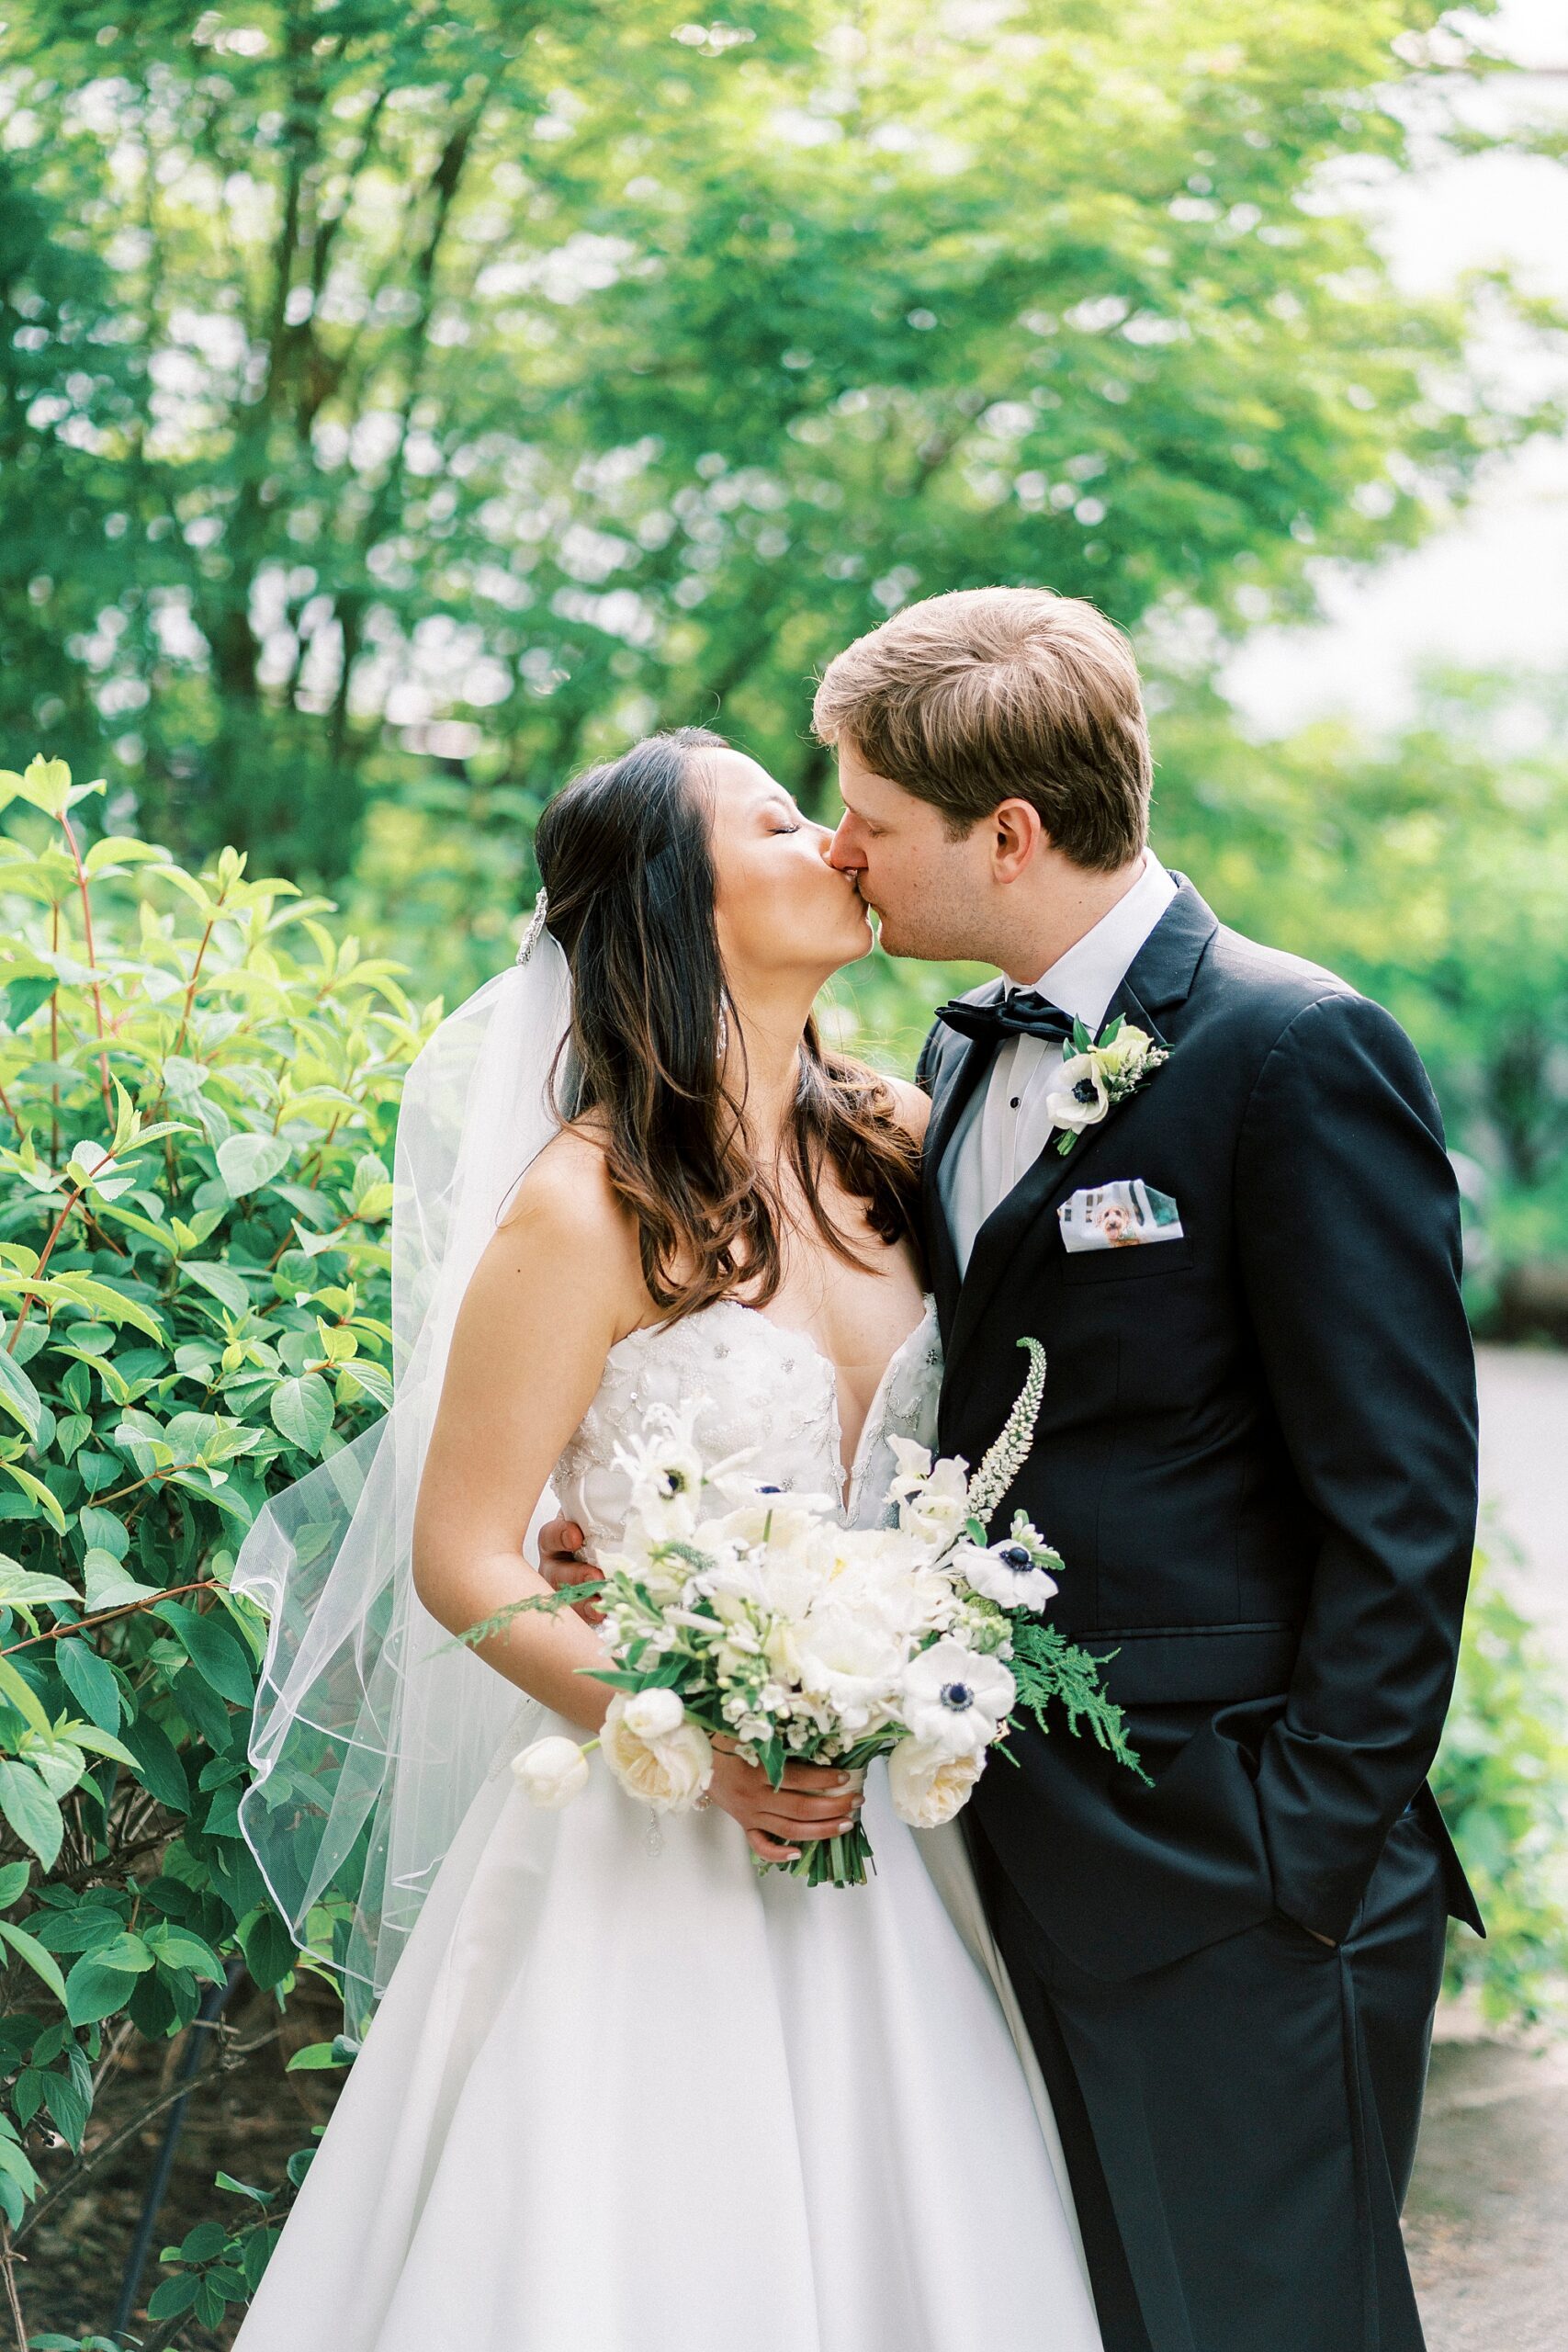 newlyweds kiss each other in garden at The Spring House